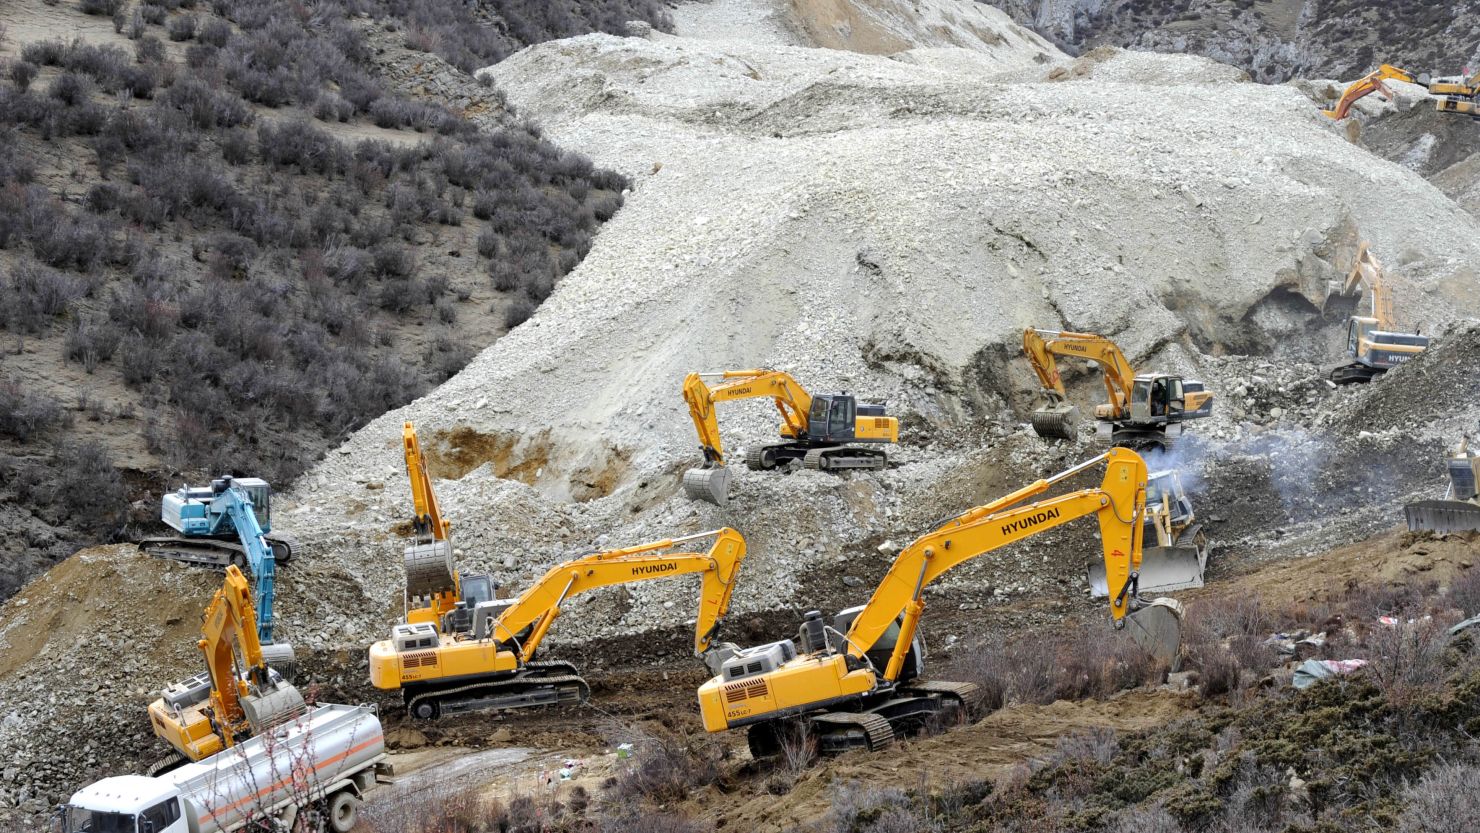 A landslide buried 83 workers at a gold mine in the Tibet Autonomous Region.